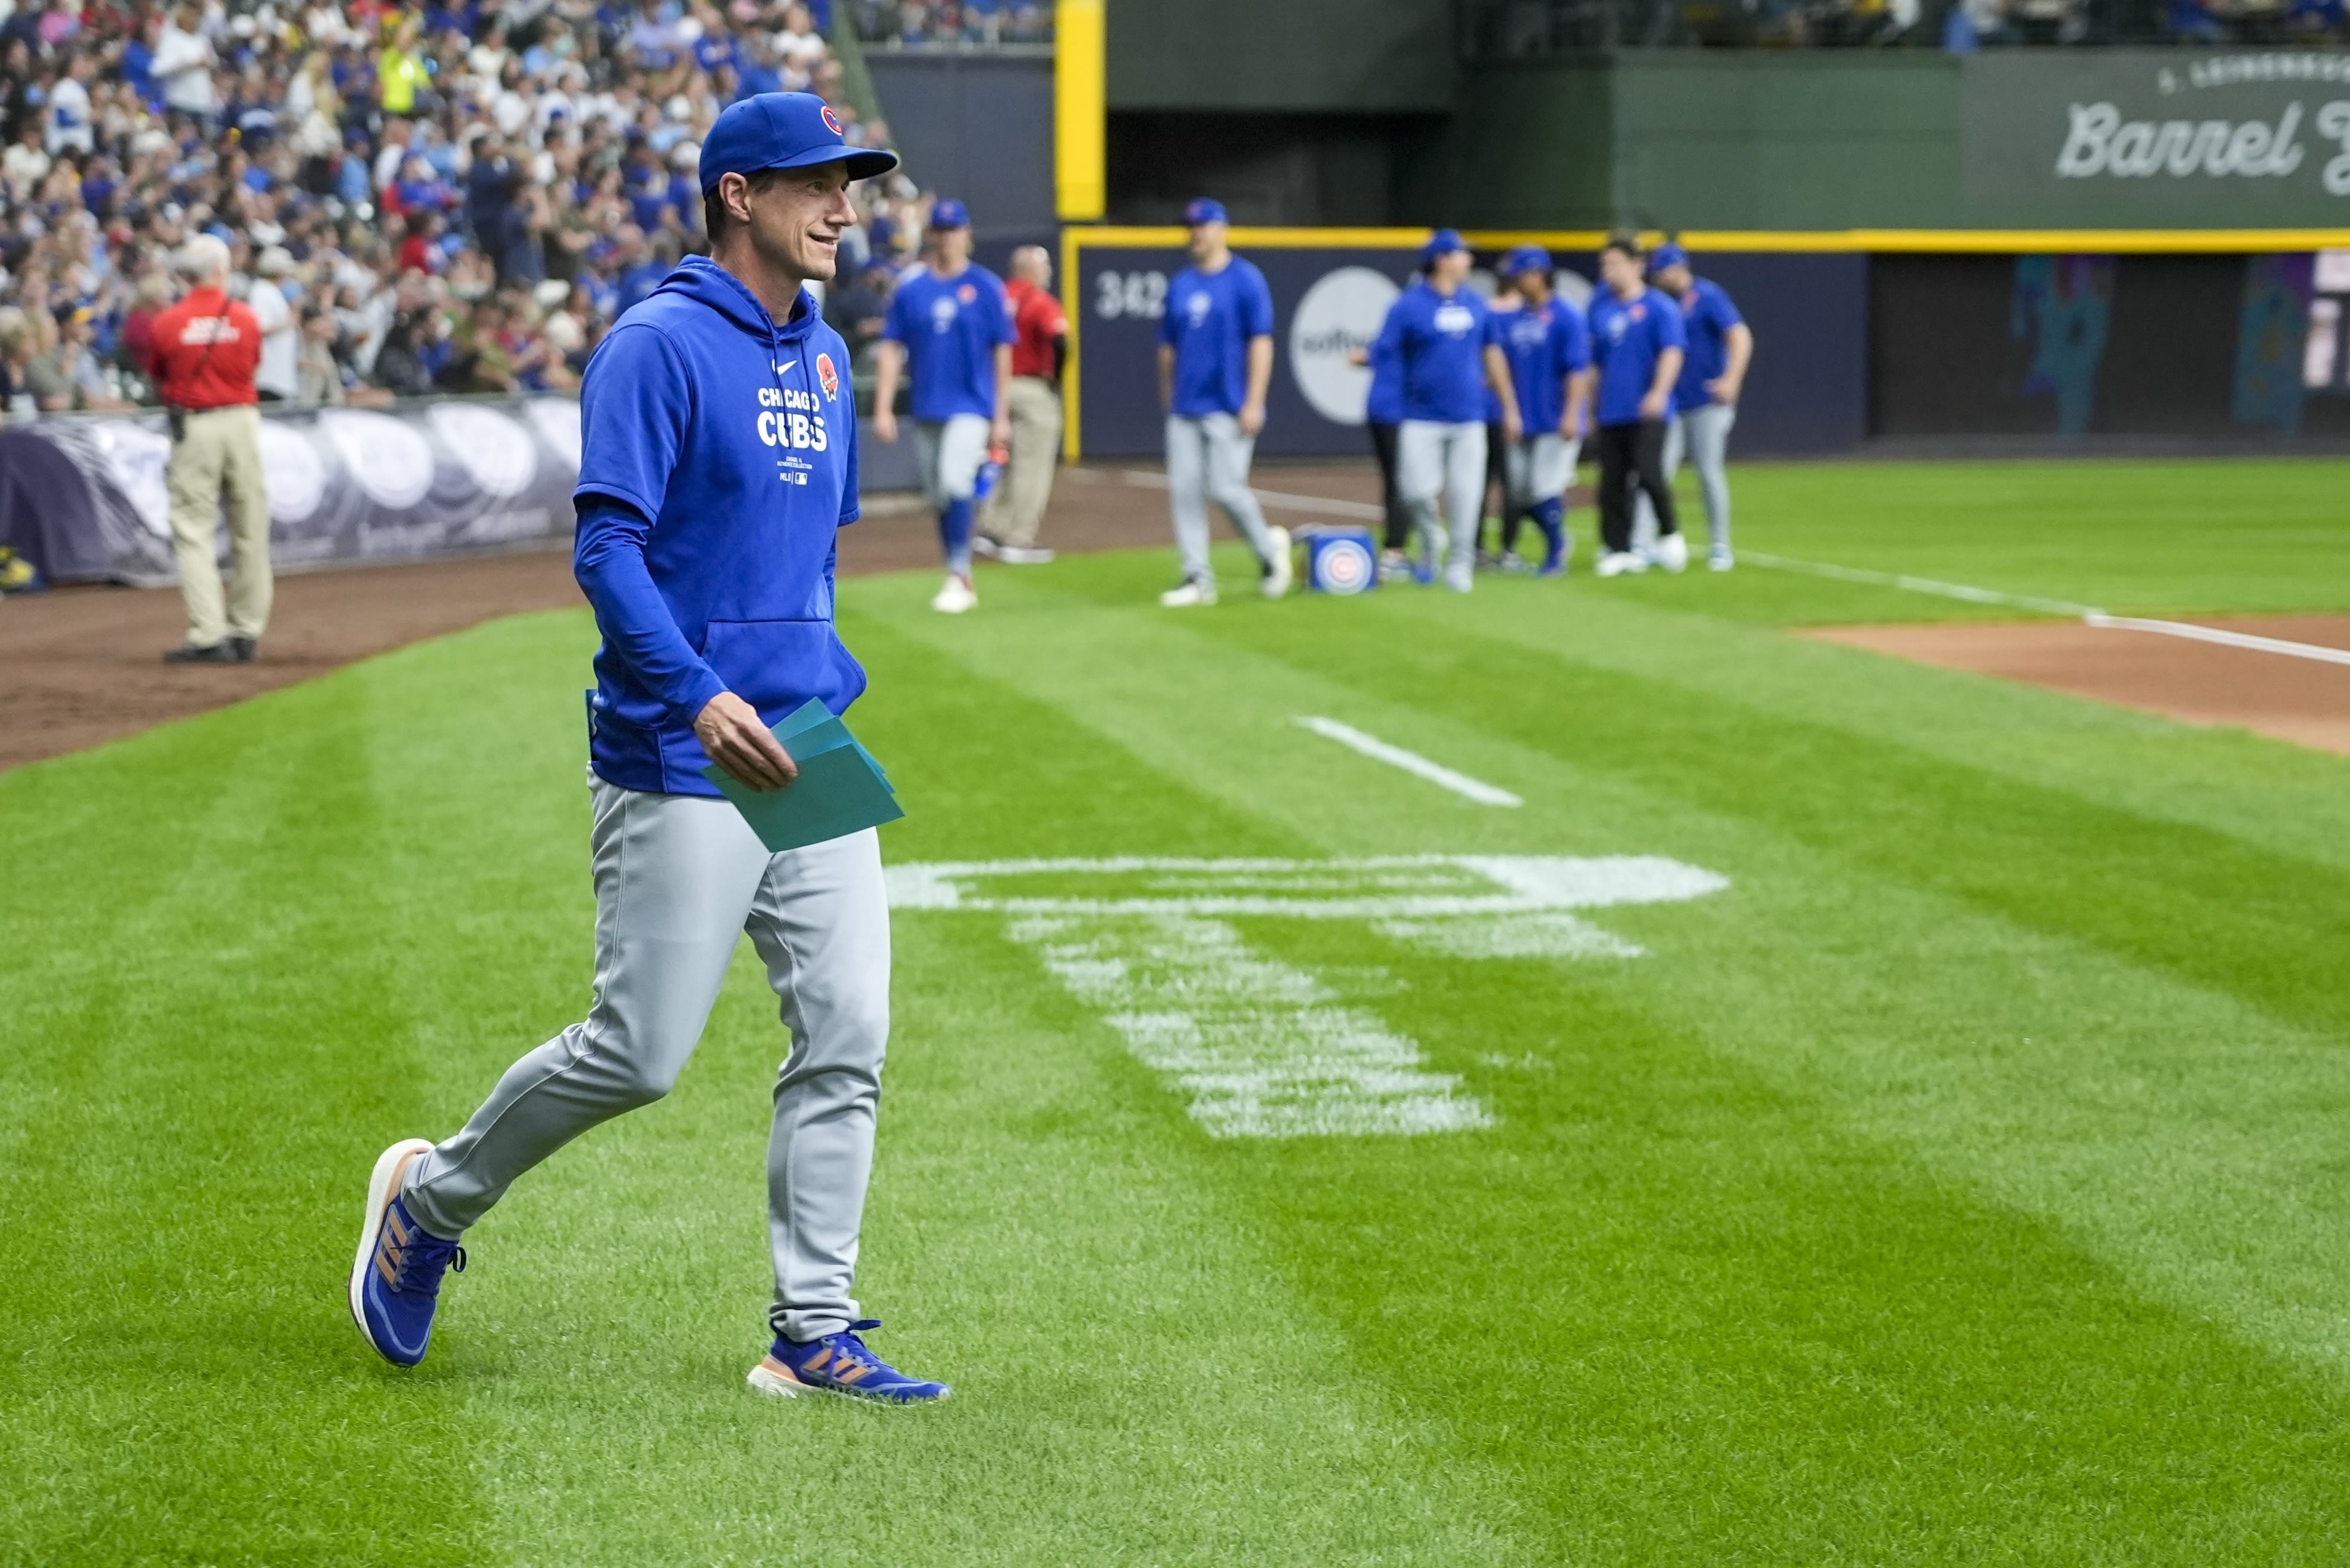 Counsell's return to Milwaukee includes thank-you message and chorus of boos